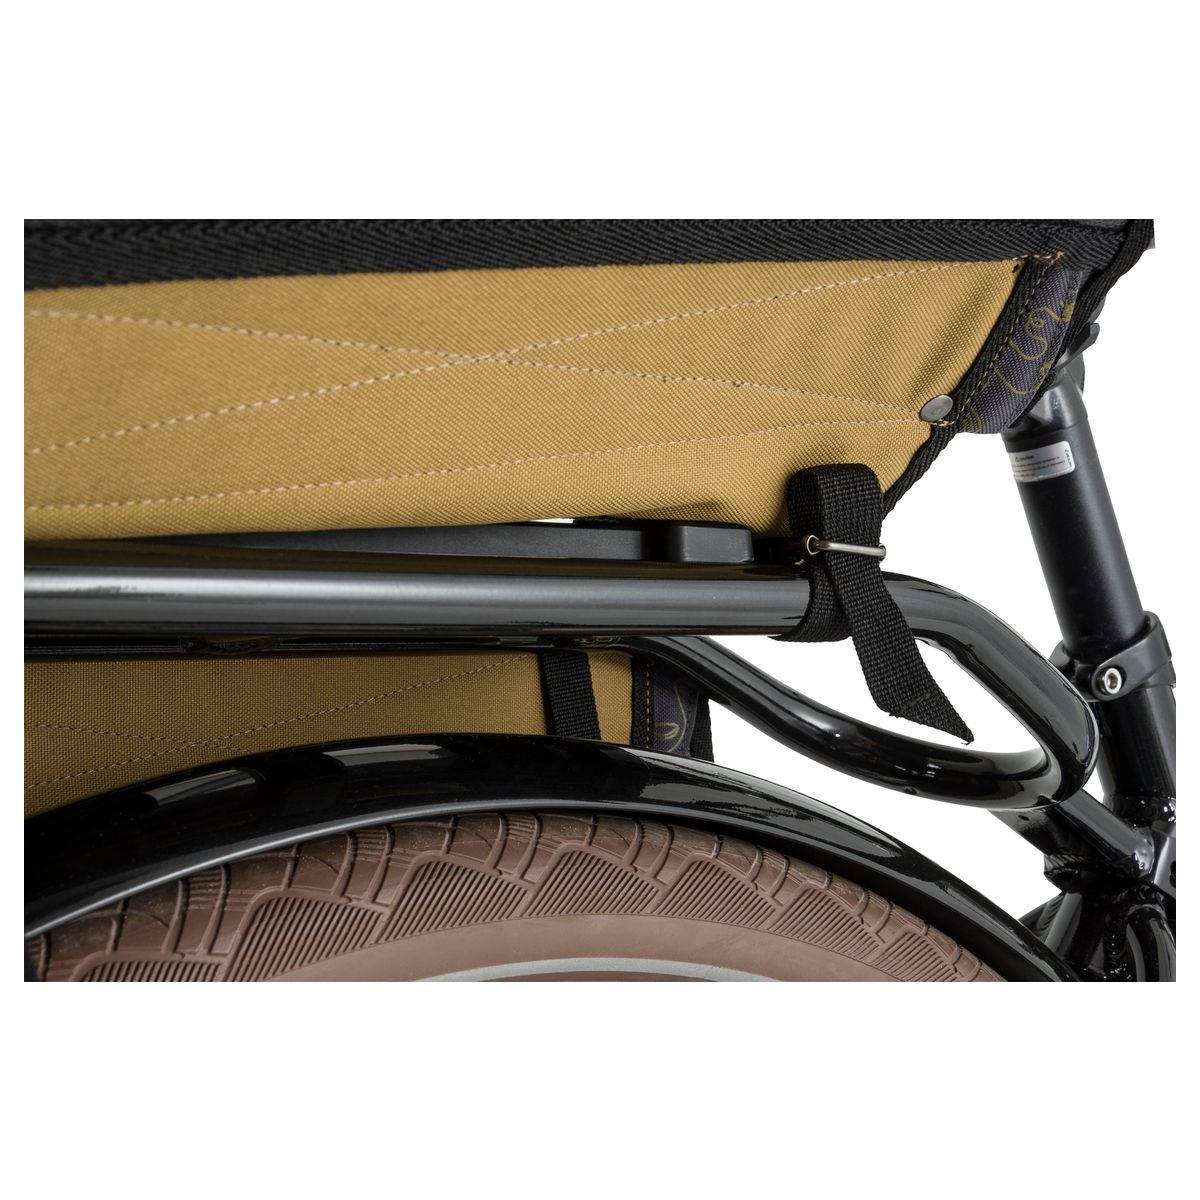 Fastrider Livia Double Bike Bag Trend fit example